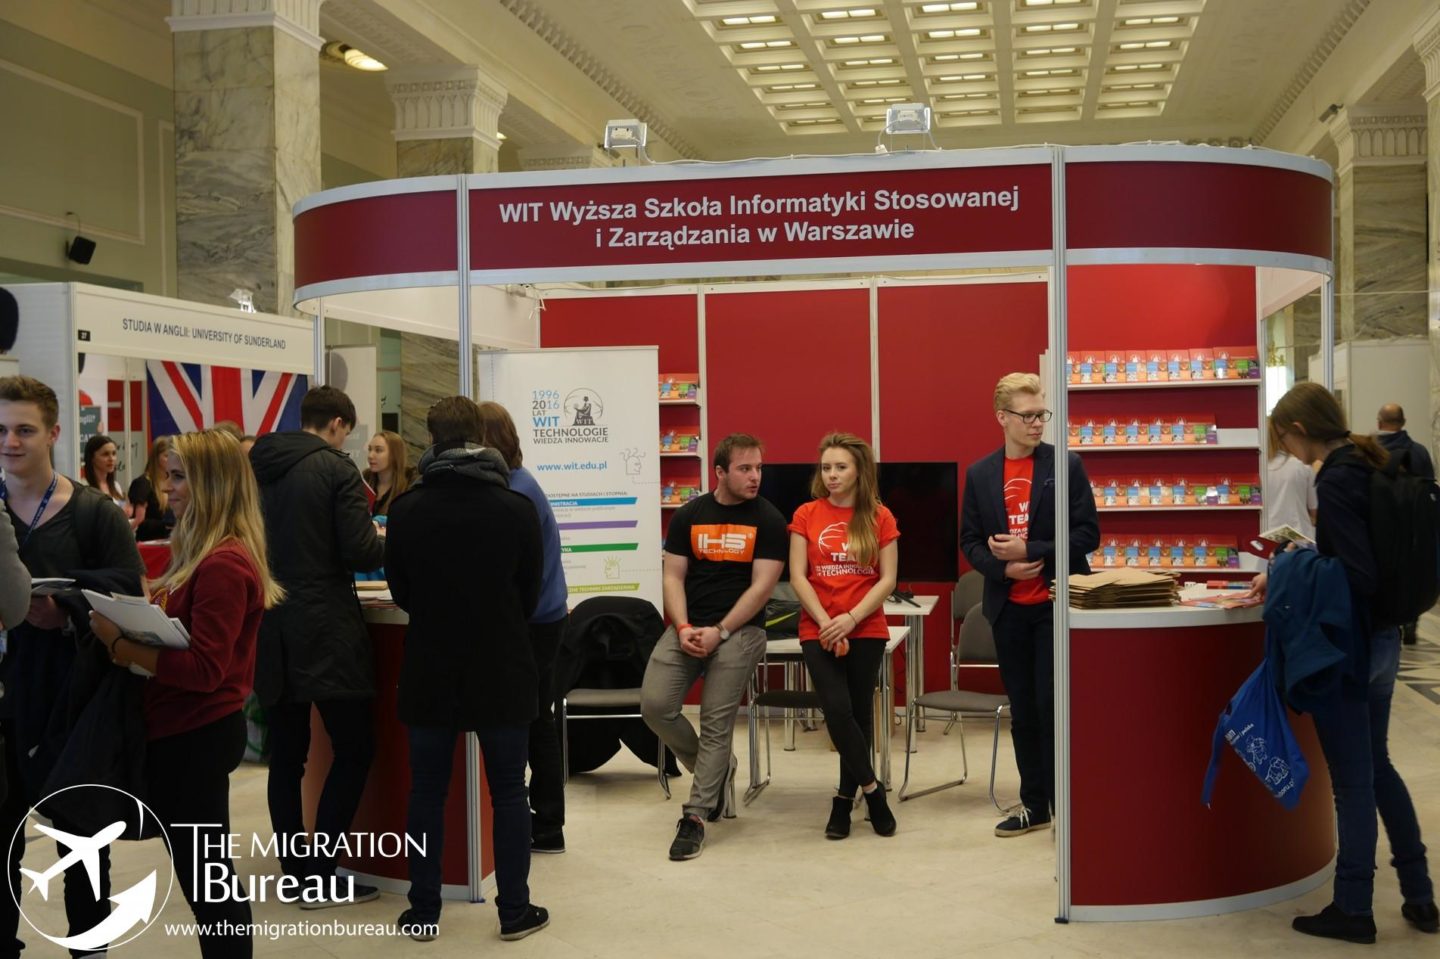 Presentations from Foreign and Polish Universities, meetings with experts. Tips for studying in Poland.